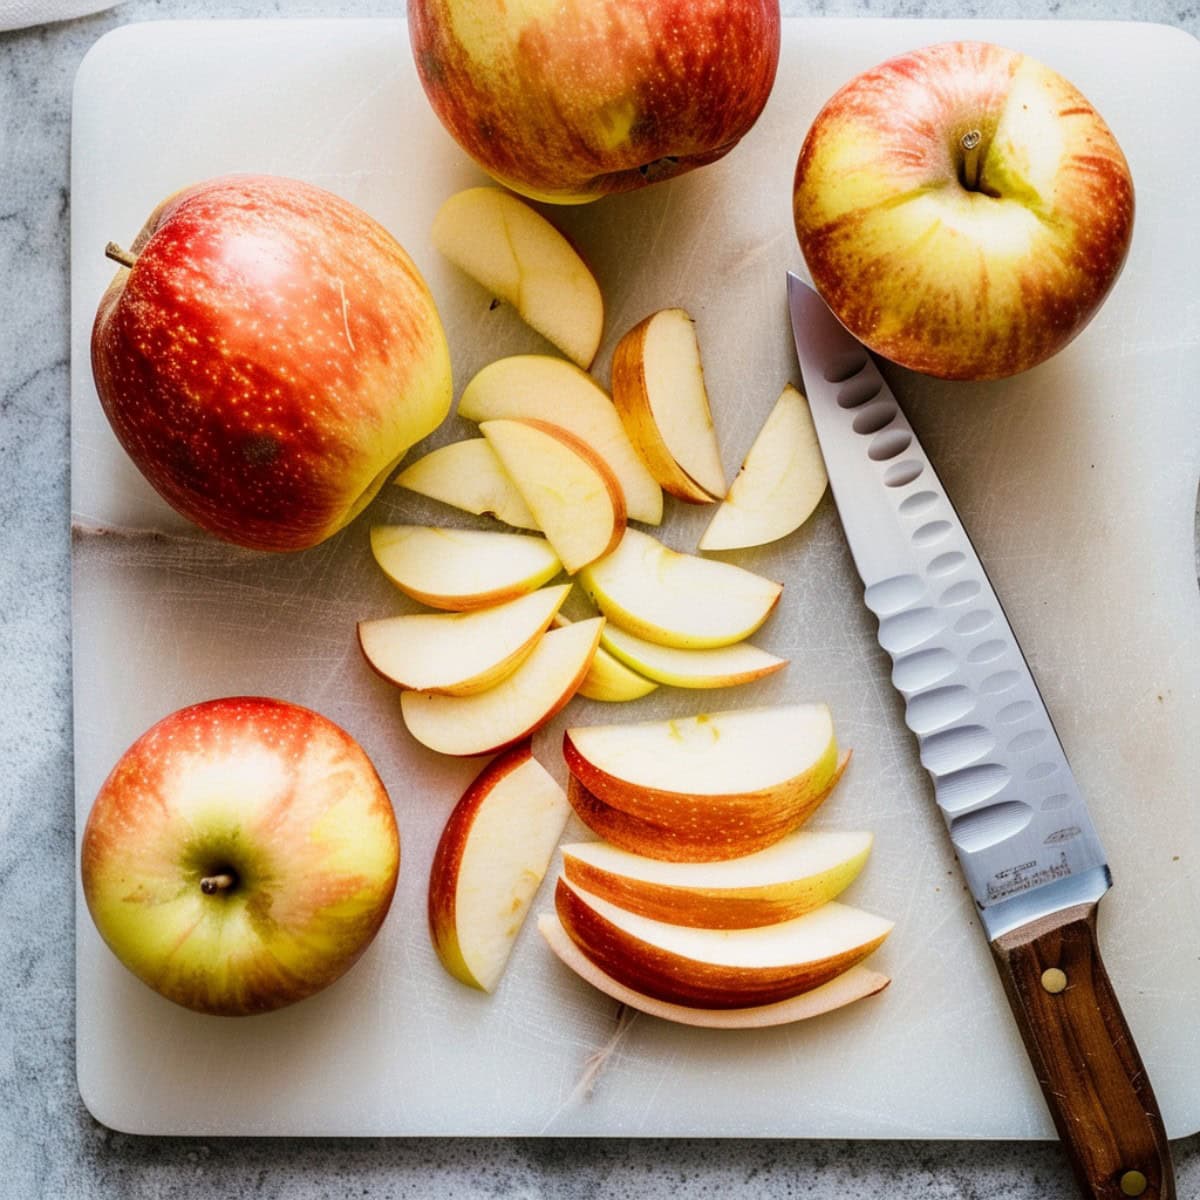 Whole and sliced apples in a cutting board featuring a knife